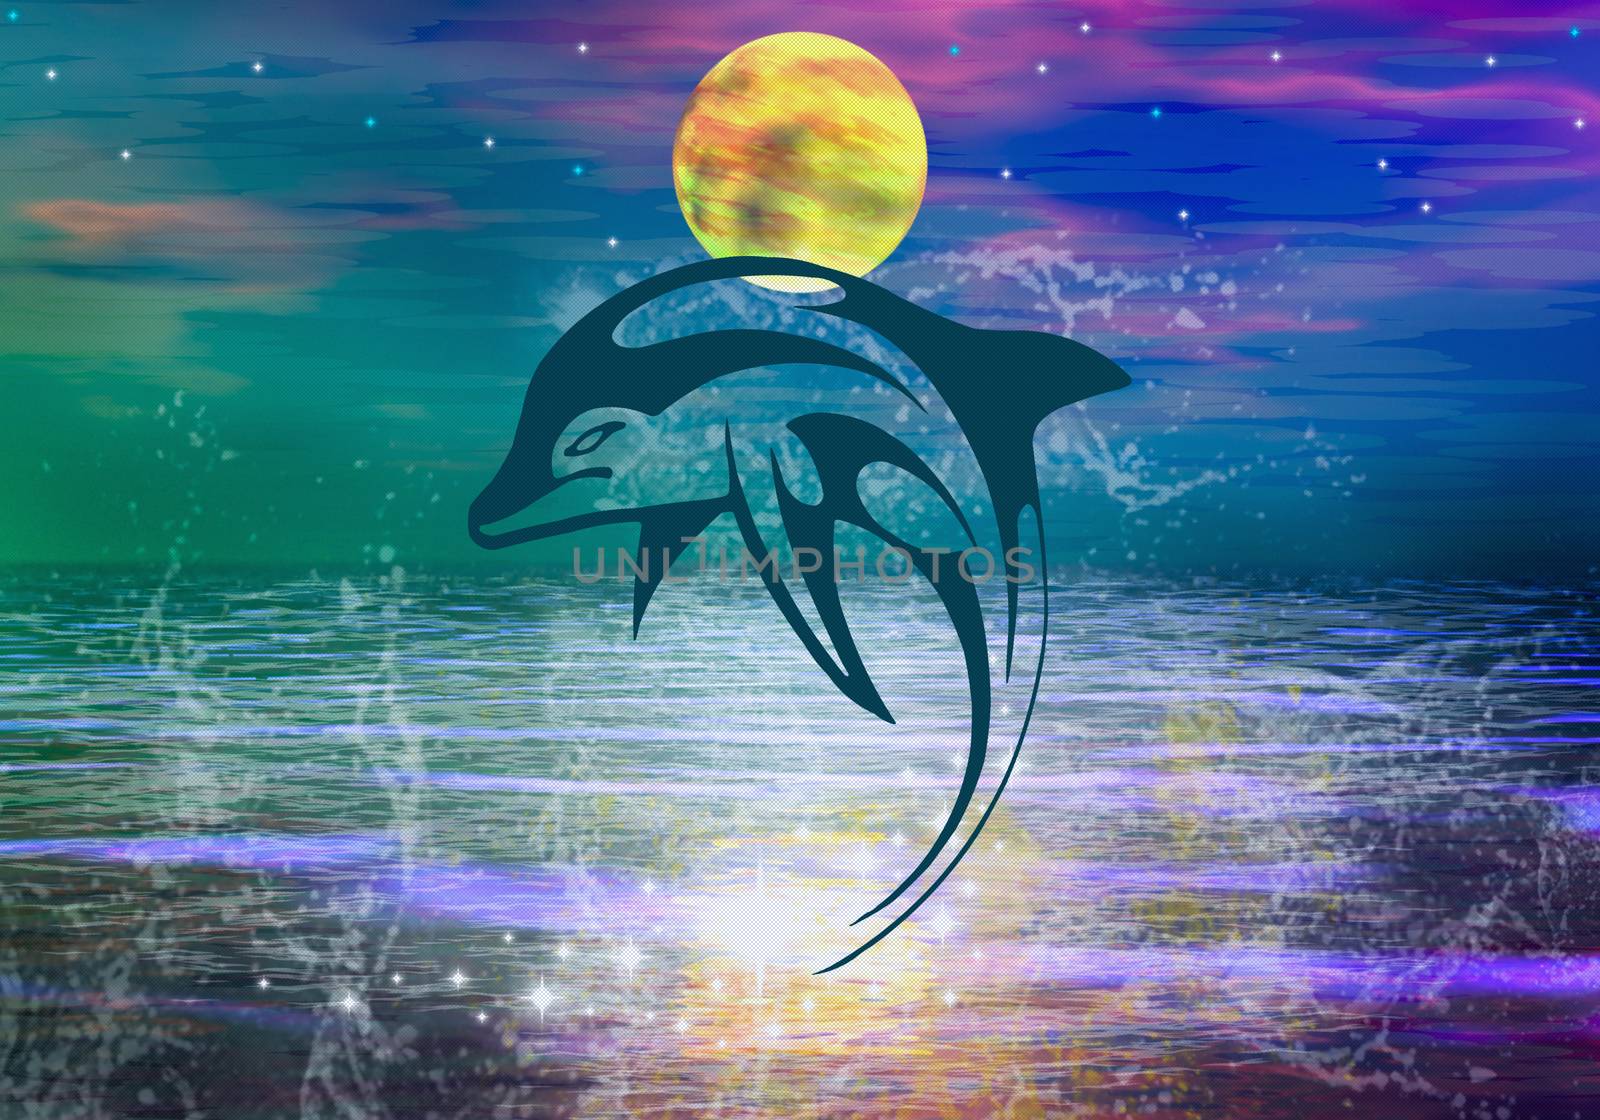 Dolphin jumps against the background of the moon by creativ000creativ